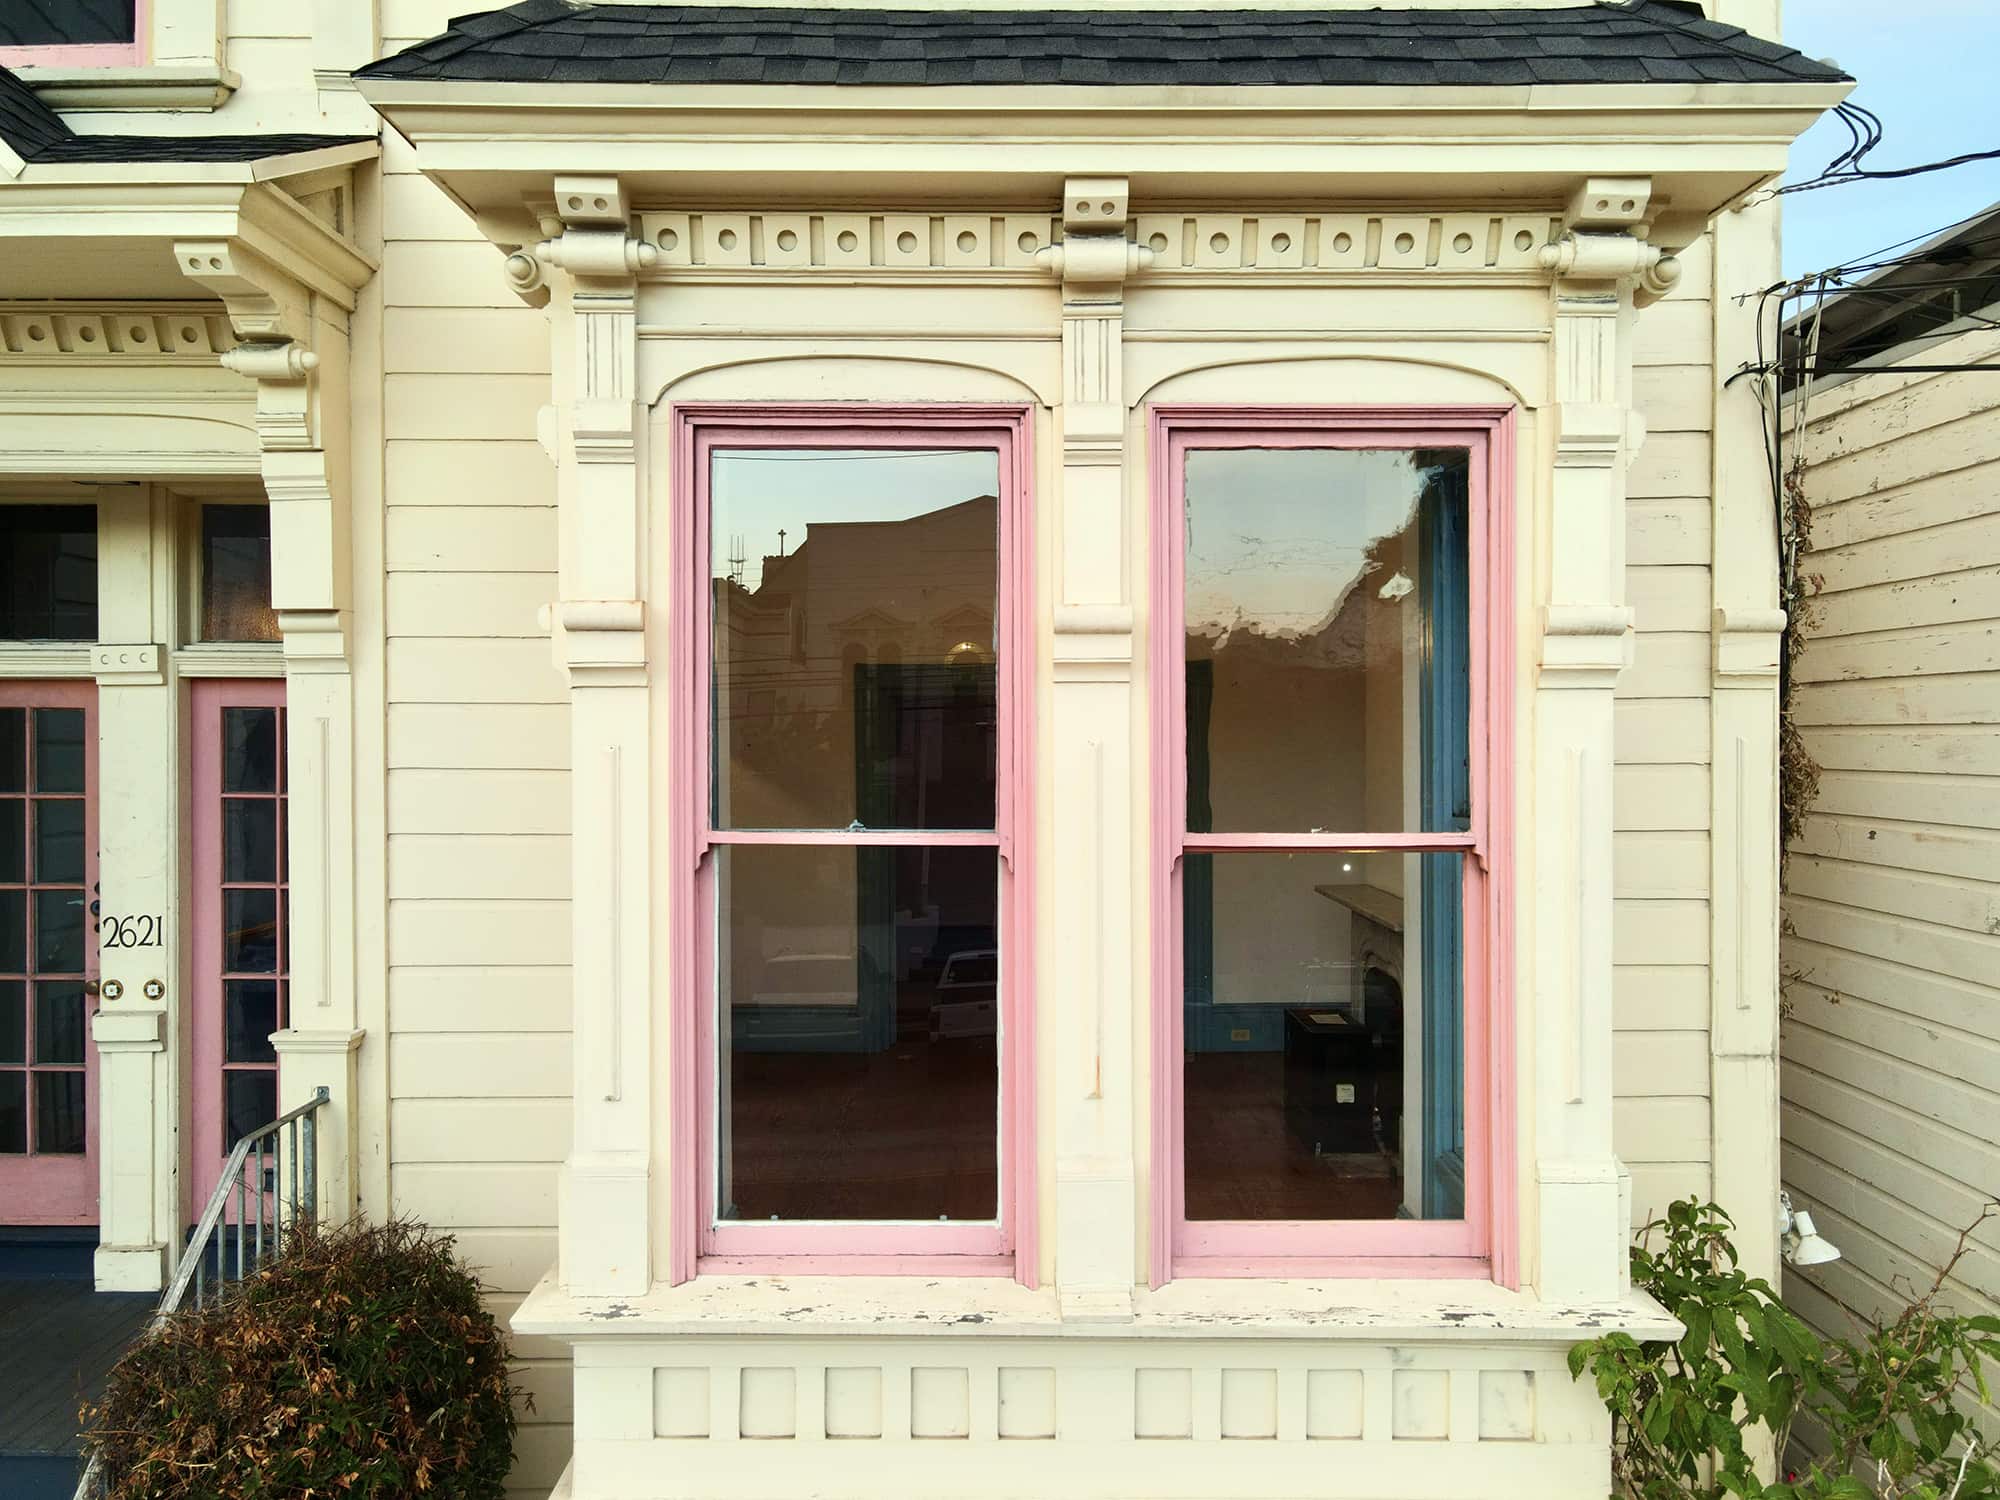 The bay window at 2621 Bryant Street